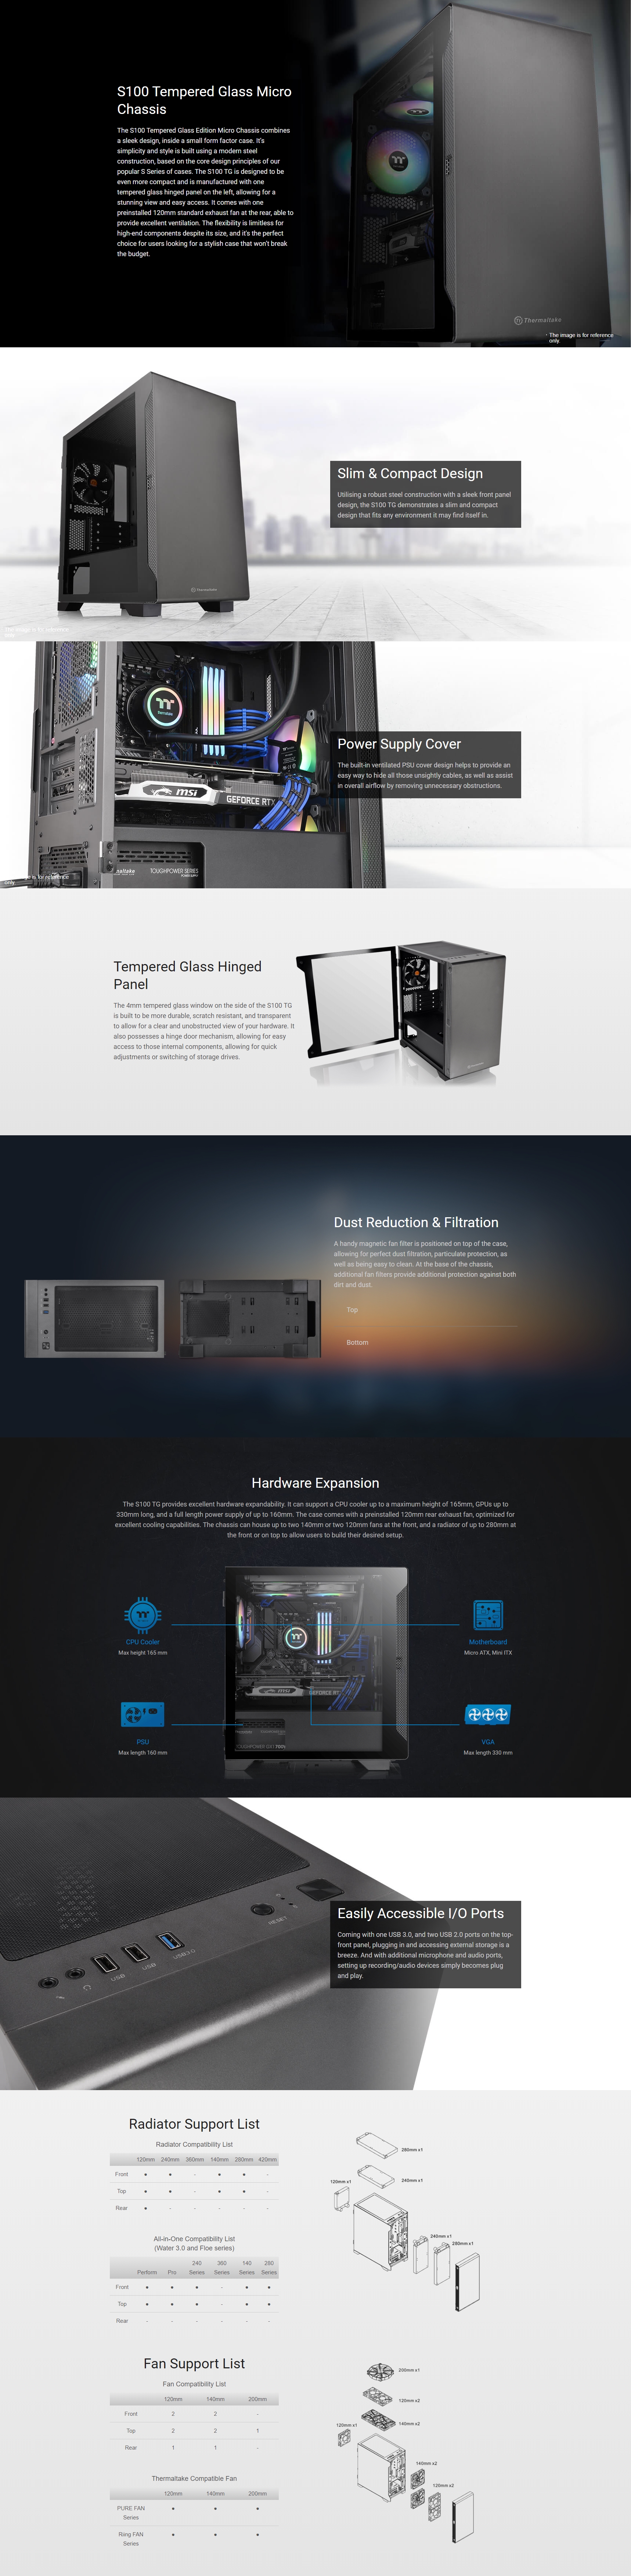 A large marketing image providing additional information about the product Thermaltake S100 - Micro Tower Case (Black) - Additional alt info not provided